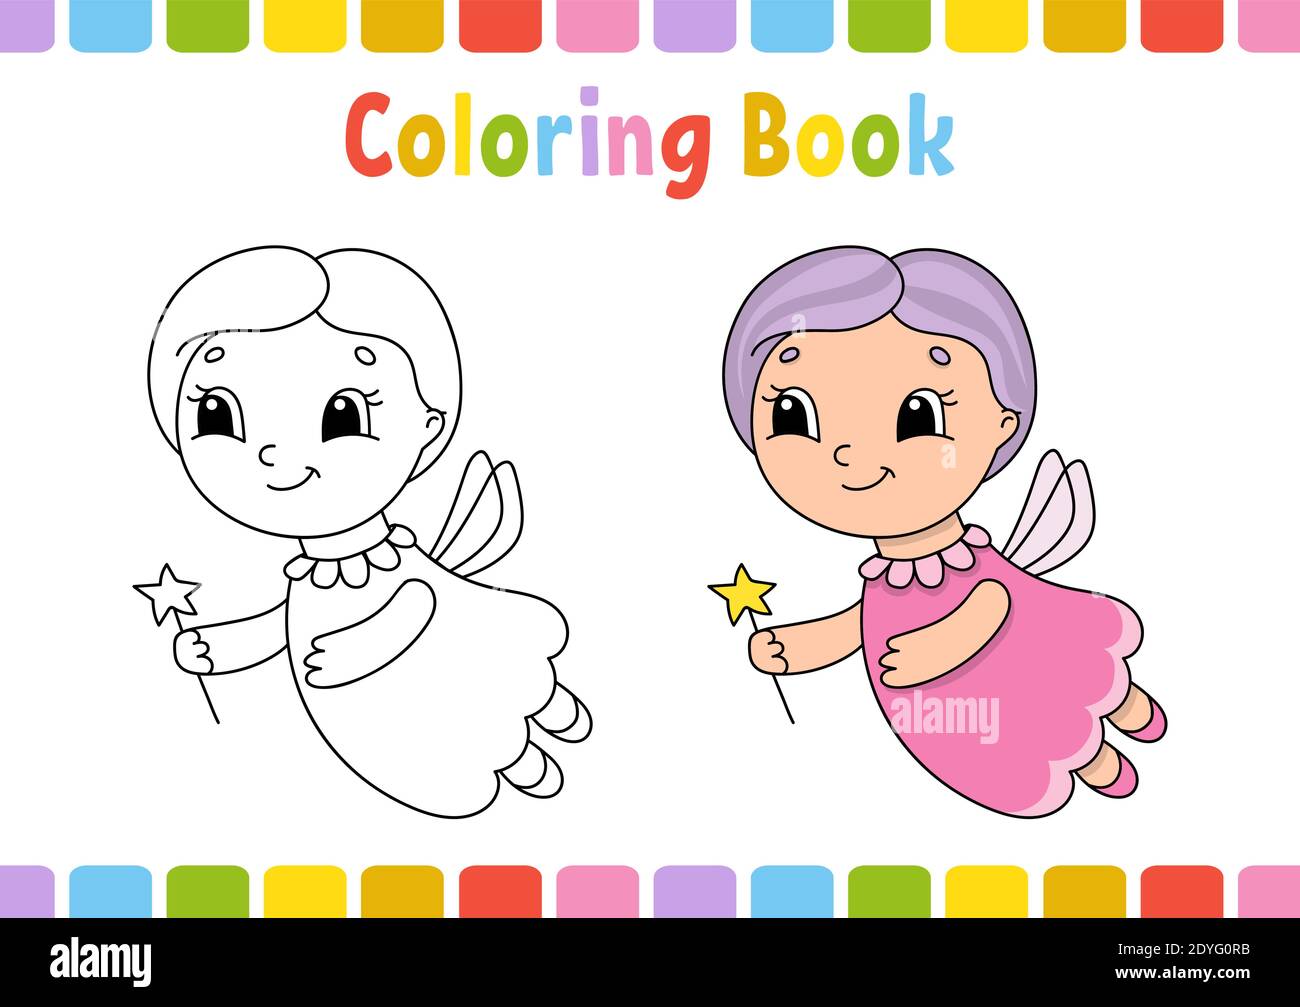 Coloring book for kids. Cheerful character. Simple flat isolated vector illustration in cute cartoon style Stock Vector